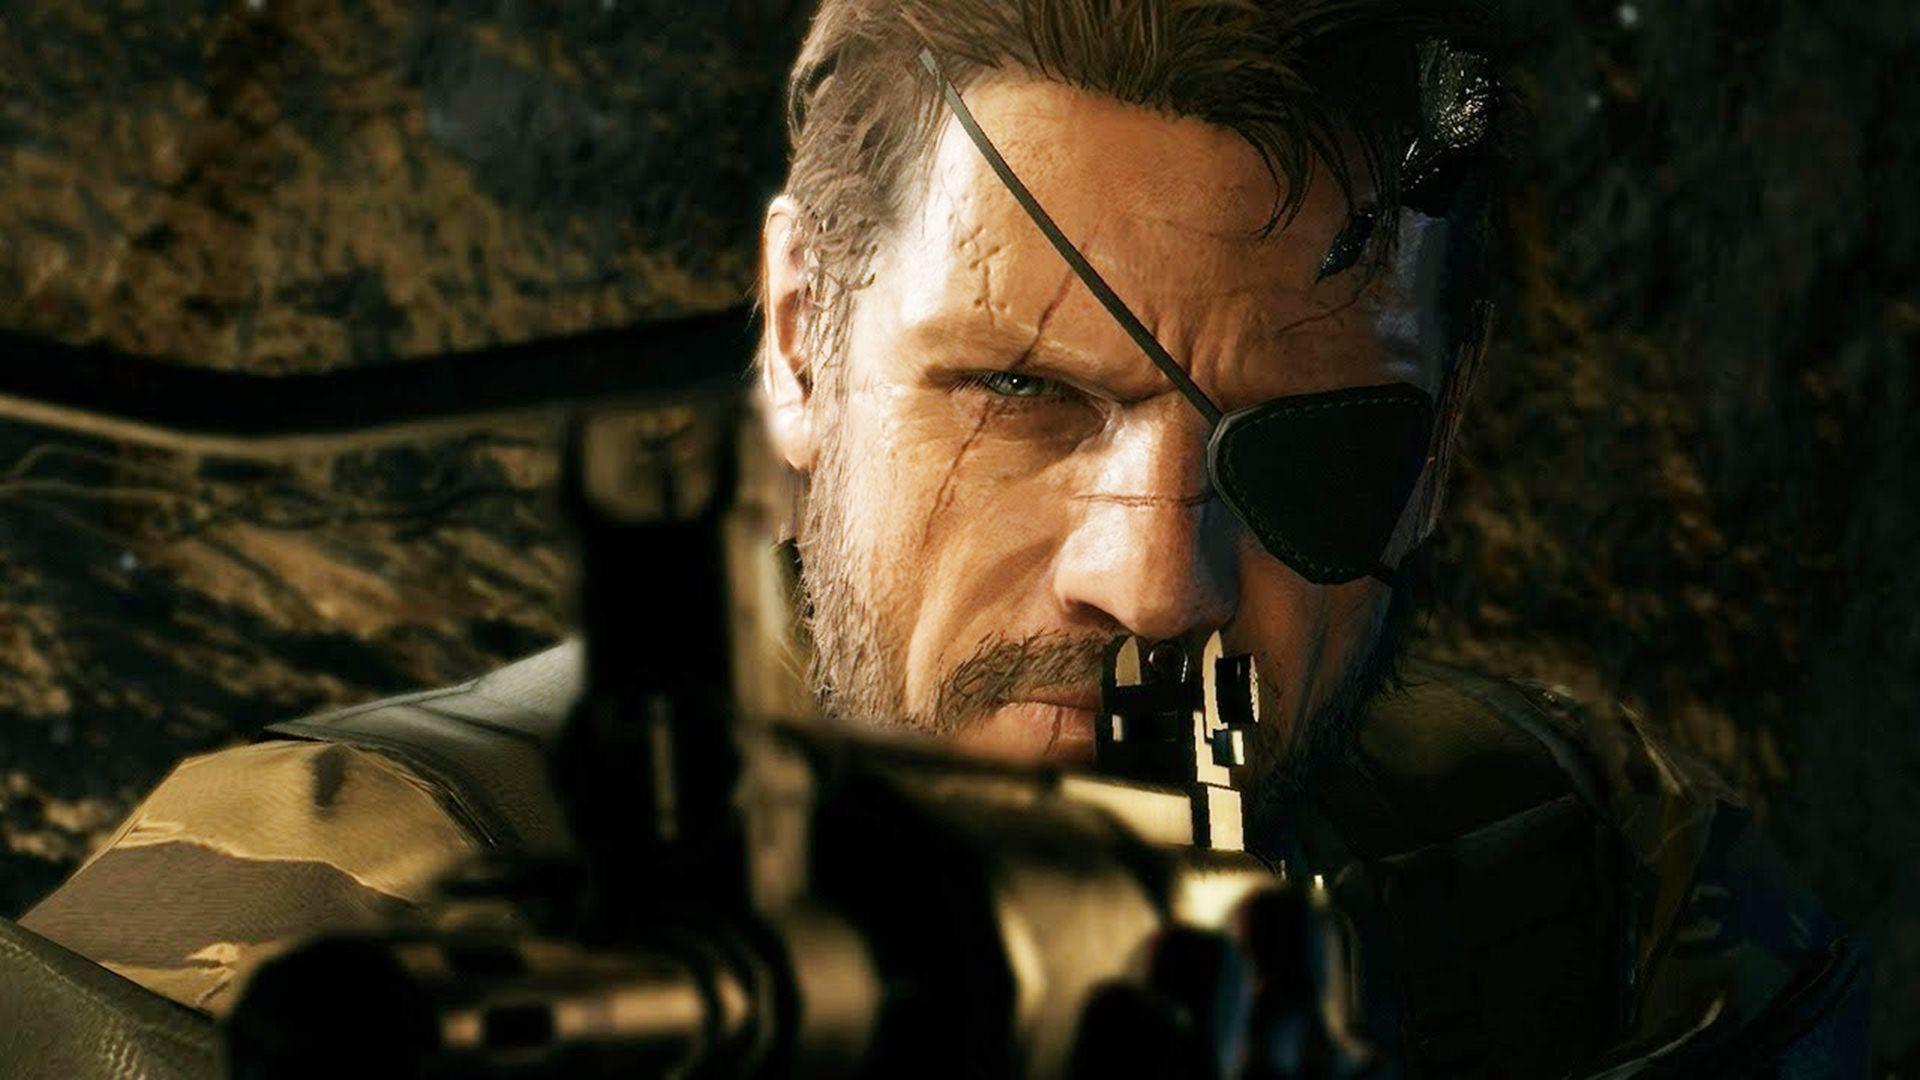 Metal Gear Solid The Phantom Pain Wallpapers, Pictures, Wallpaper